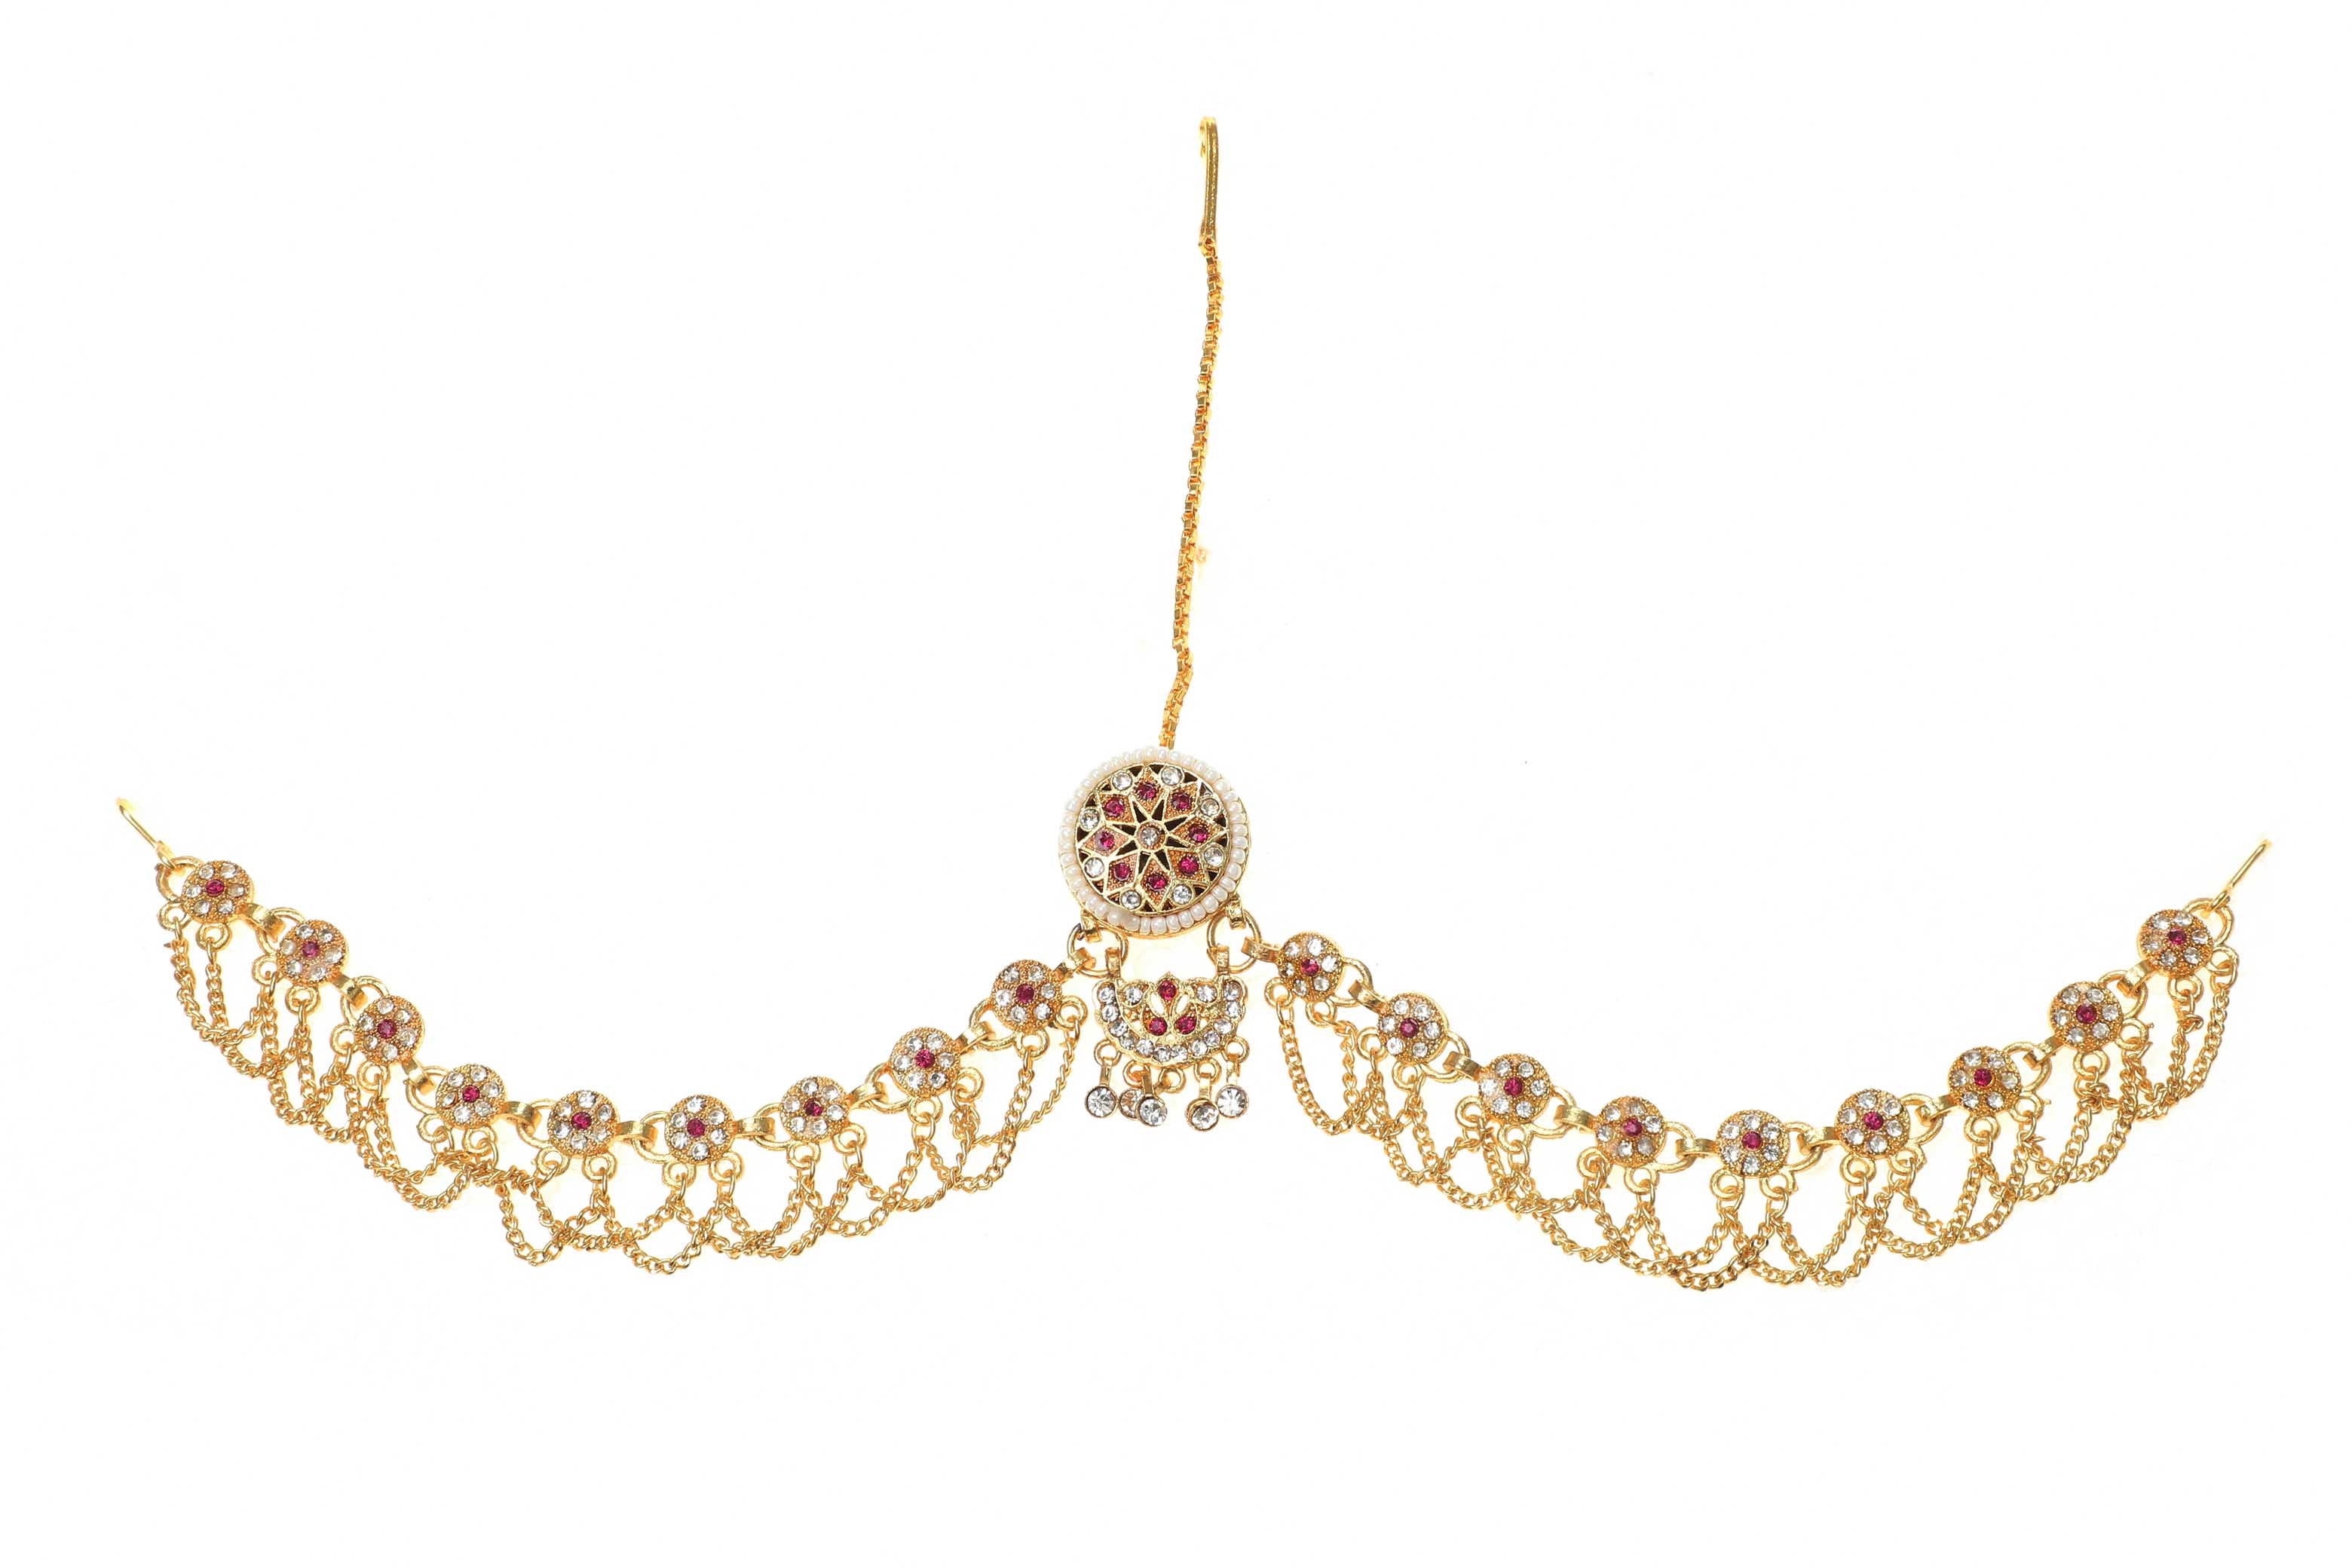 Indian Jewellery from Meira Jewellery:Rajasthani Jewellery,Rajputi Gold Plated Rakhdi Set Studded With White-Pink Color American Diamonds